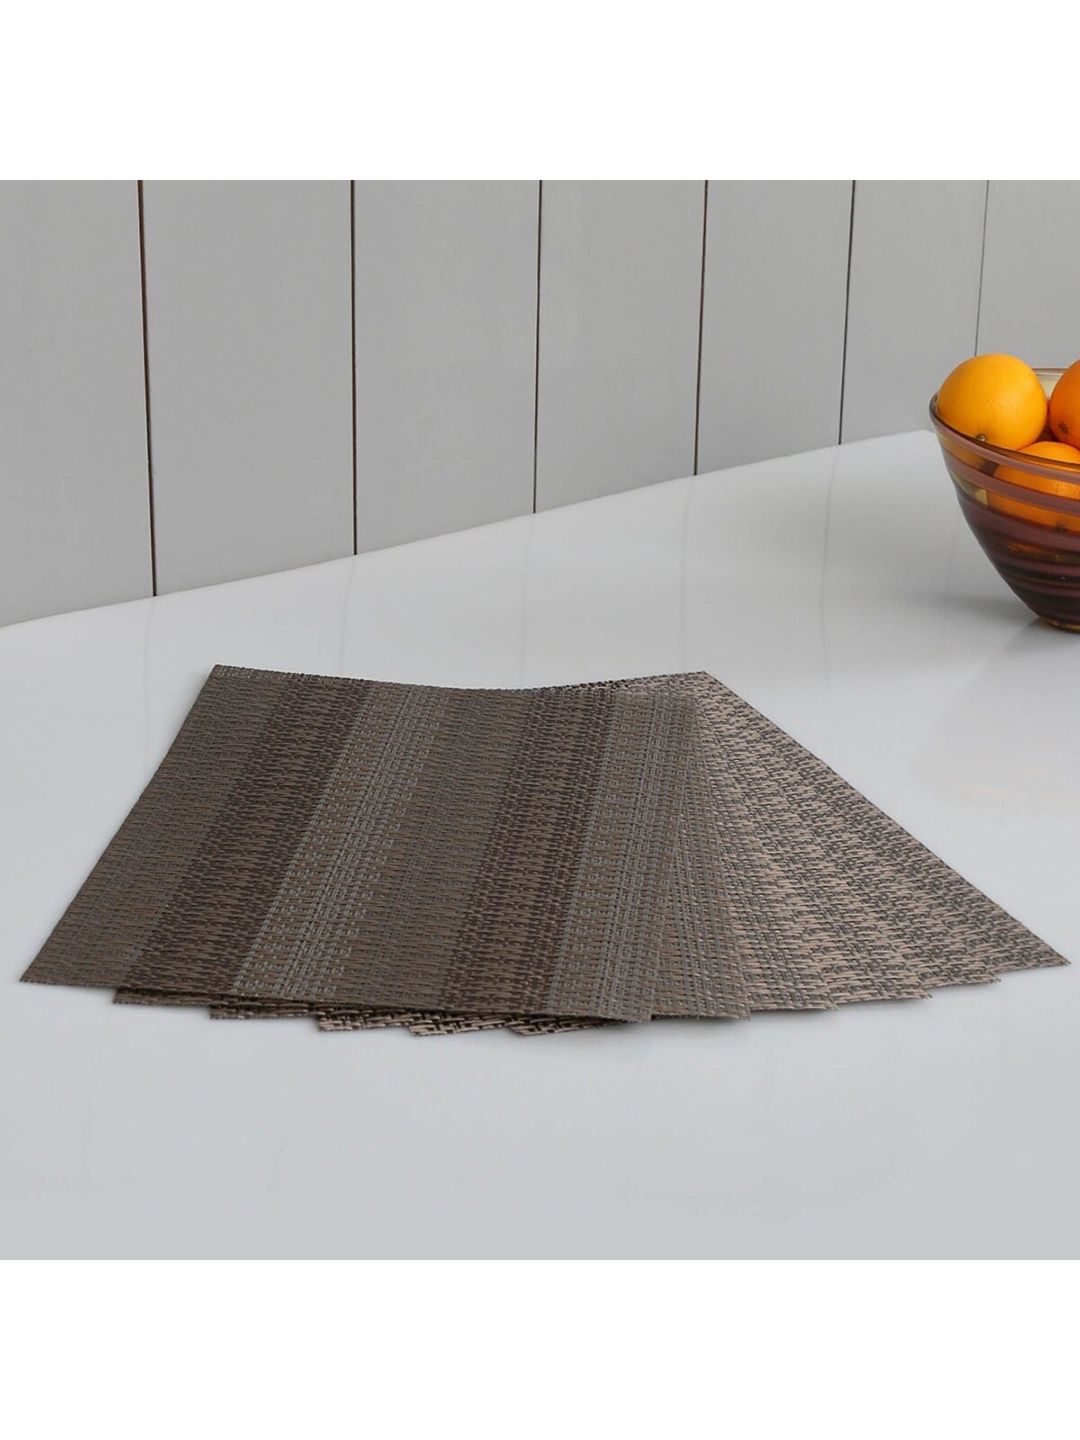 Home Centre Set Of 6 Brown Textured Rectangular Table Placements Price in India